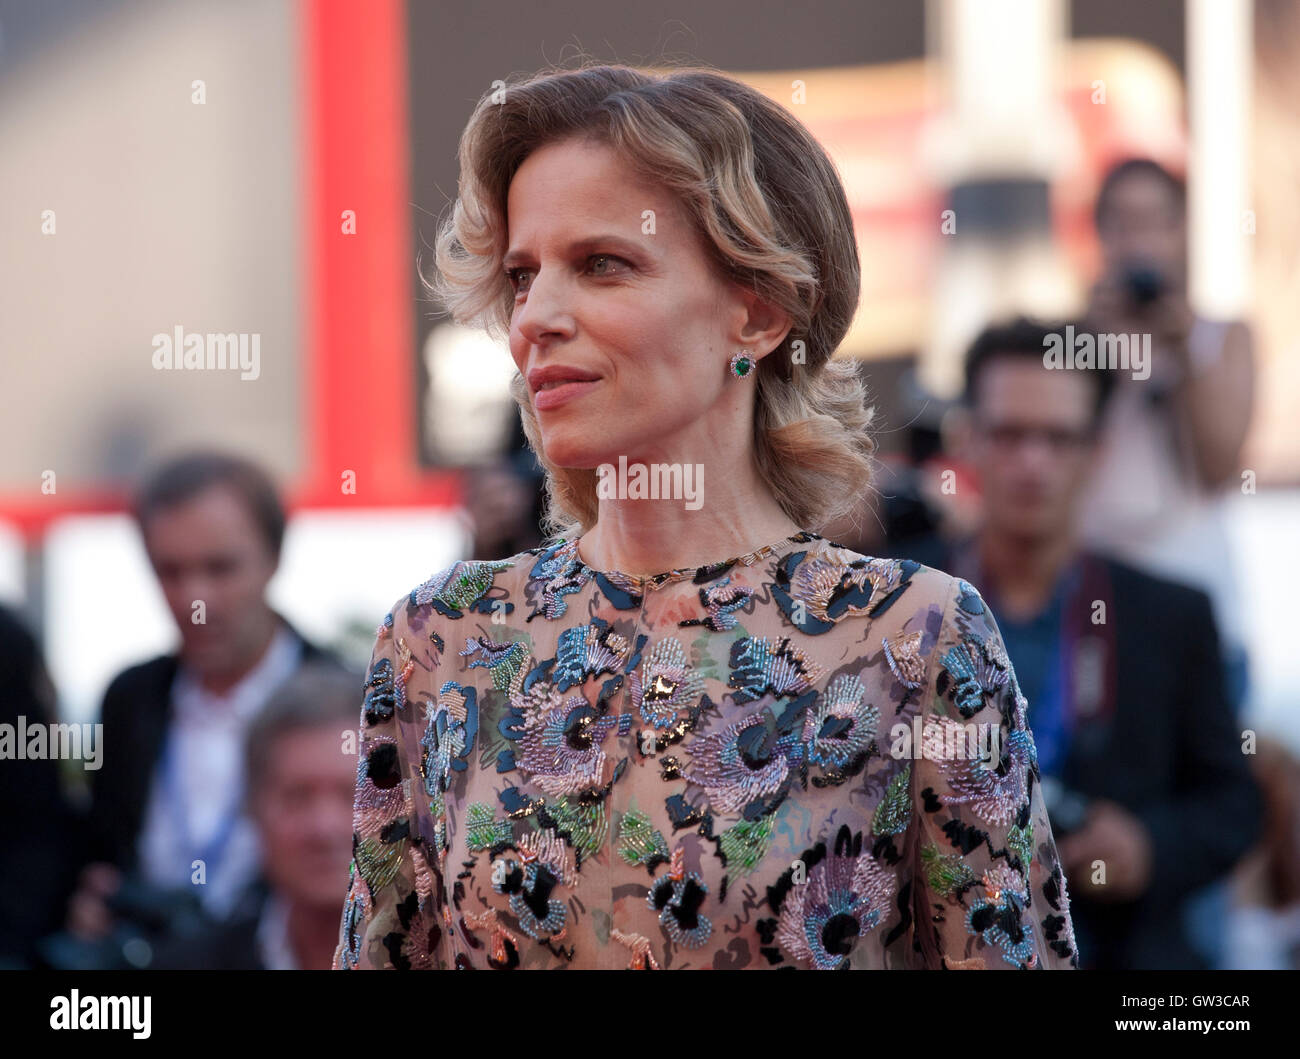 Sonia Bergamasco at the premiere of the film The Young Pope at the 73rd Venice Film Festival, Sala Grande 2017 Stock Photo